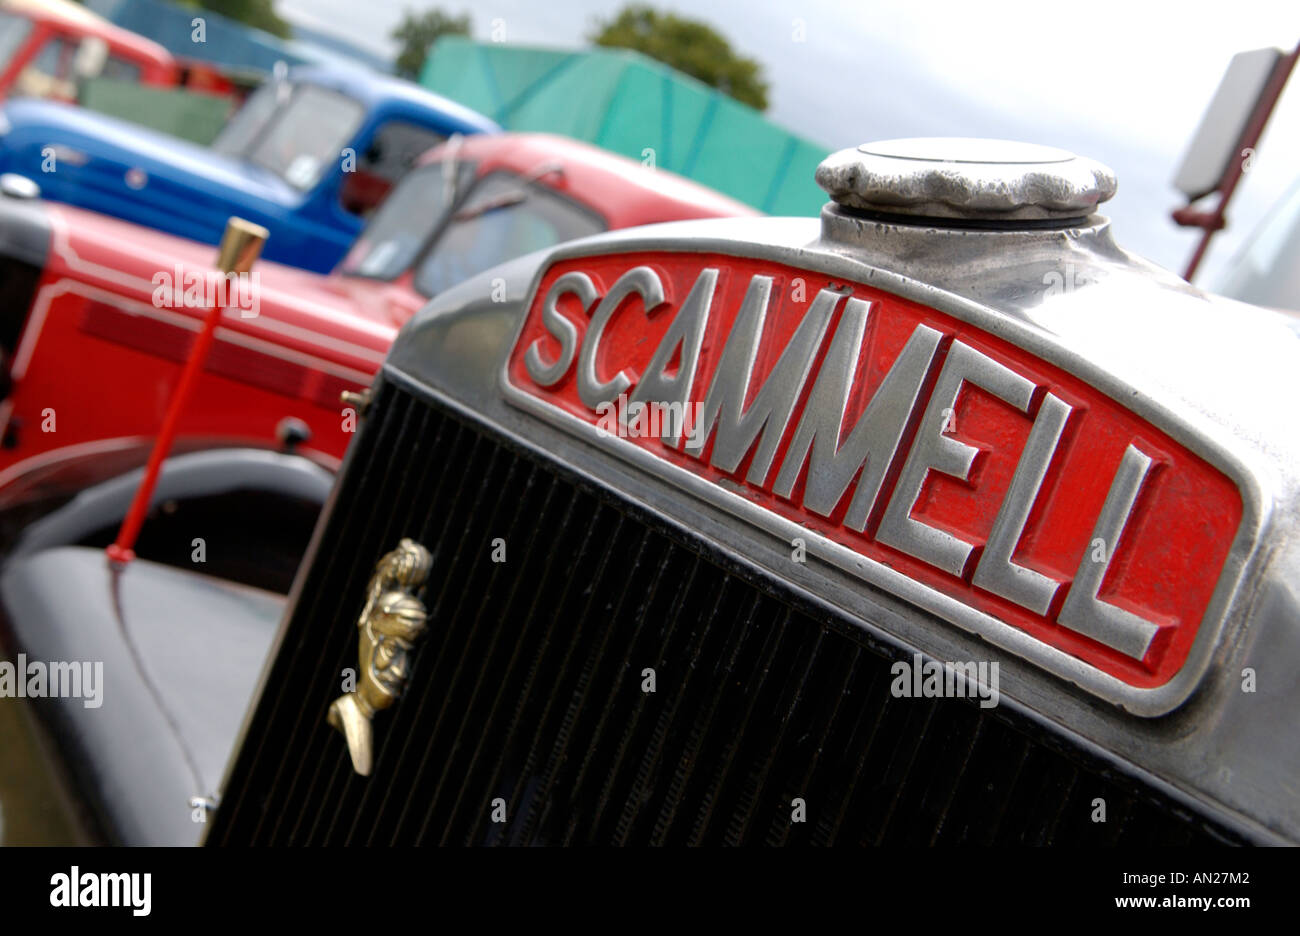 Name badge on SCAMMELL vintage truck Stock Photo